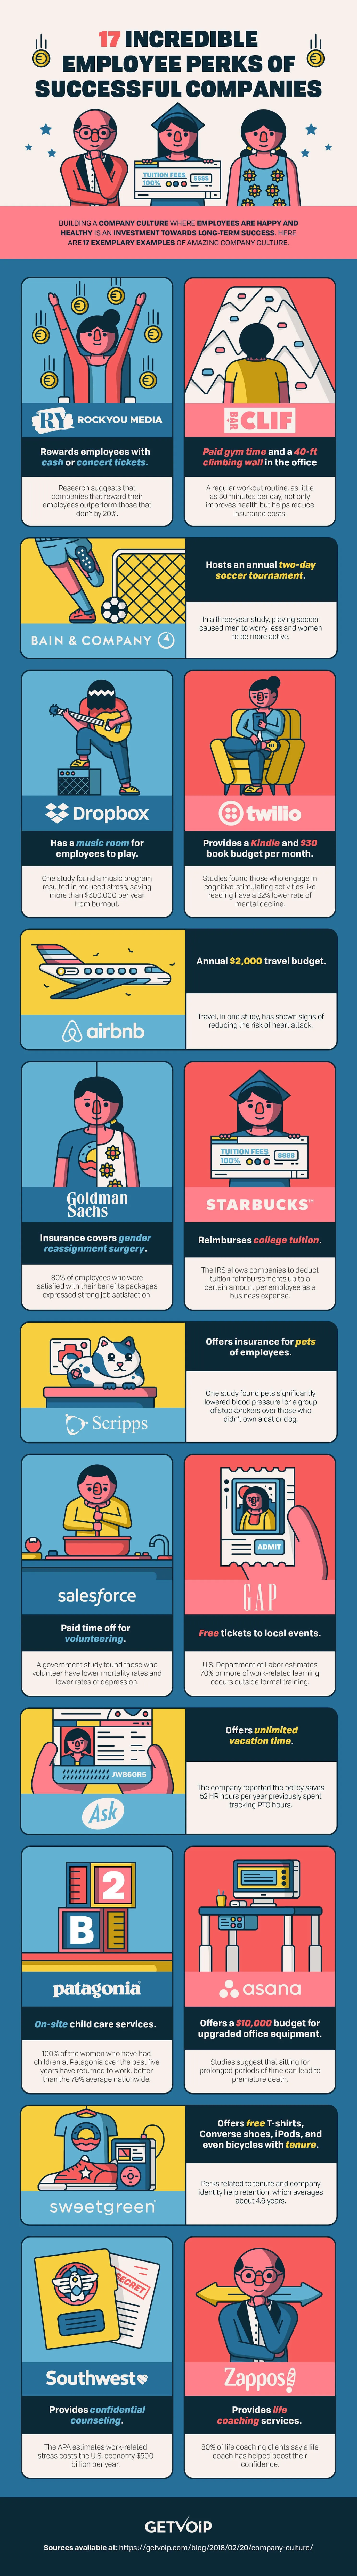 17 Incredible Employee Perks of Successful Companies - #infographic